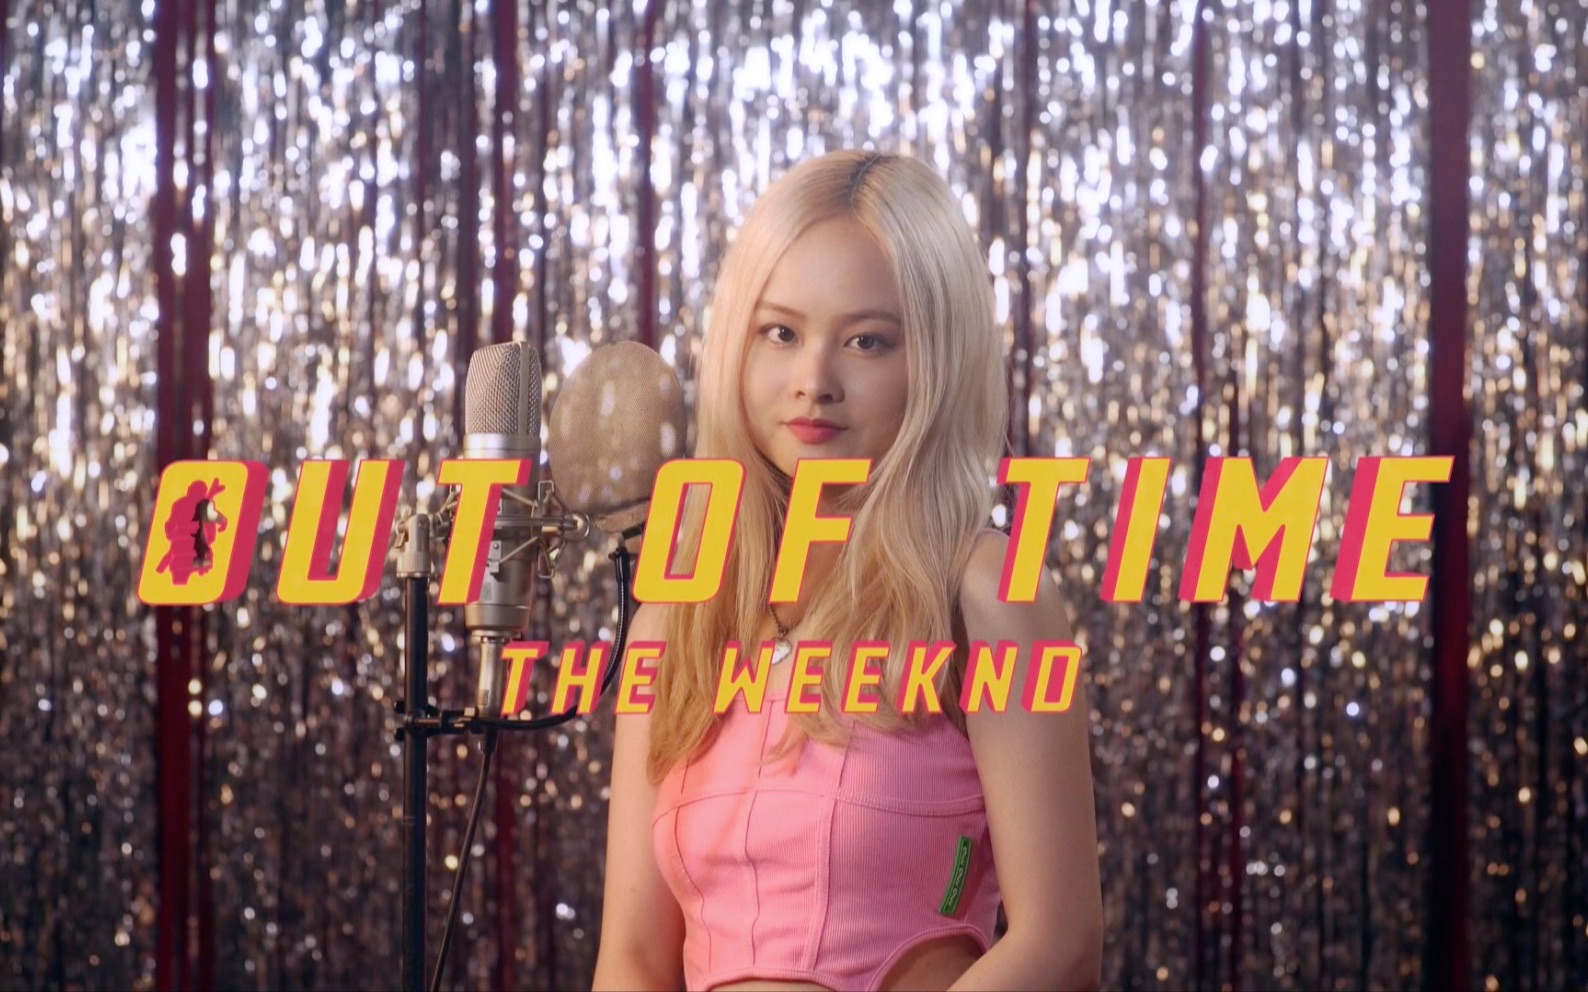 The Weeknd《out of time》|来自盆栽女粉的超用心翻唱